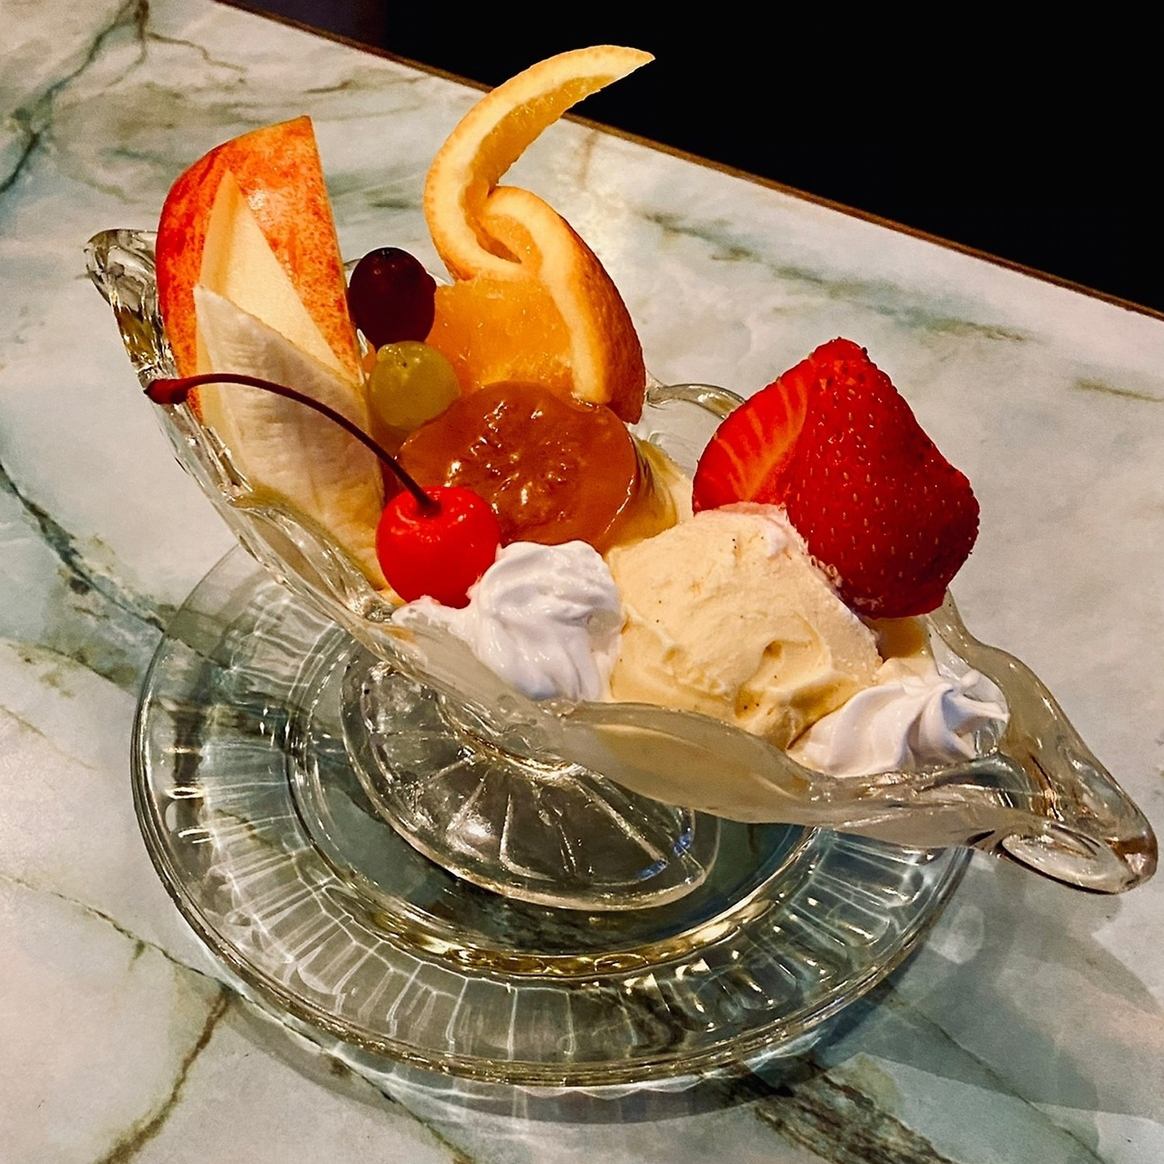 You can taste that retro pudding ★ Have an elegant time at a coffee shop that has been around for over 40 years ♪